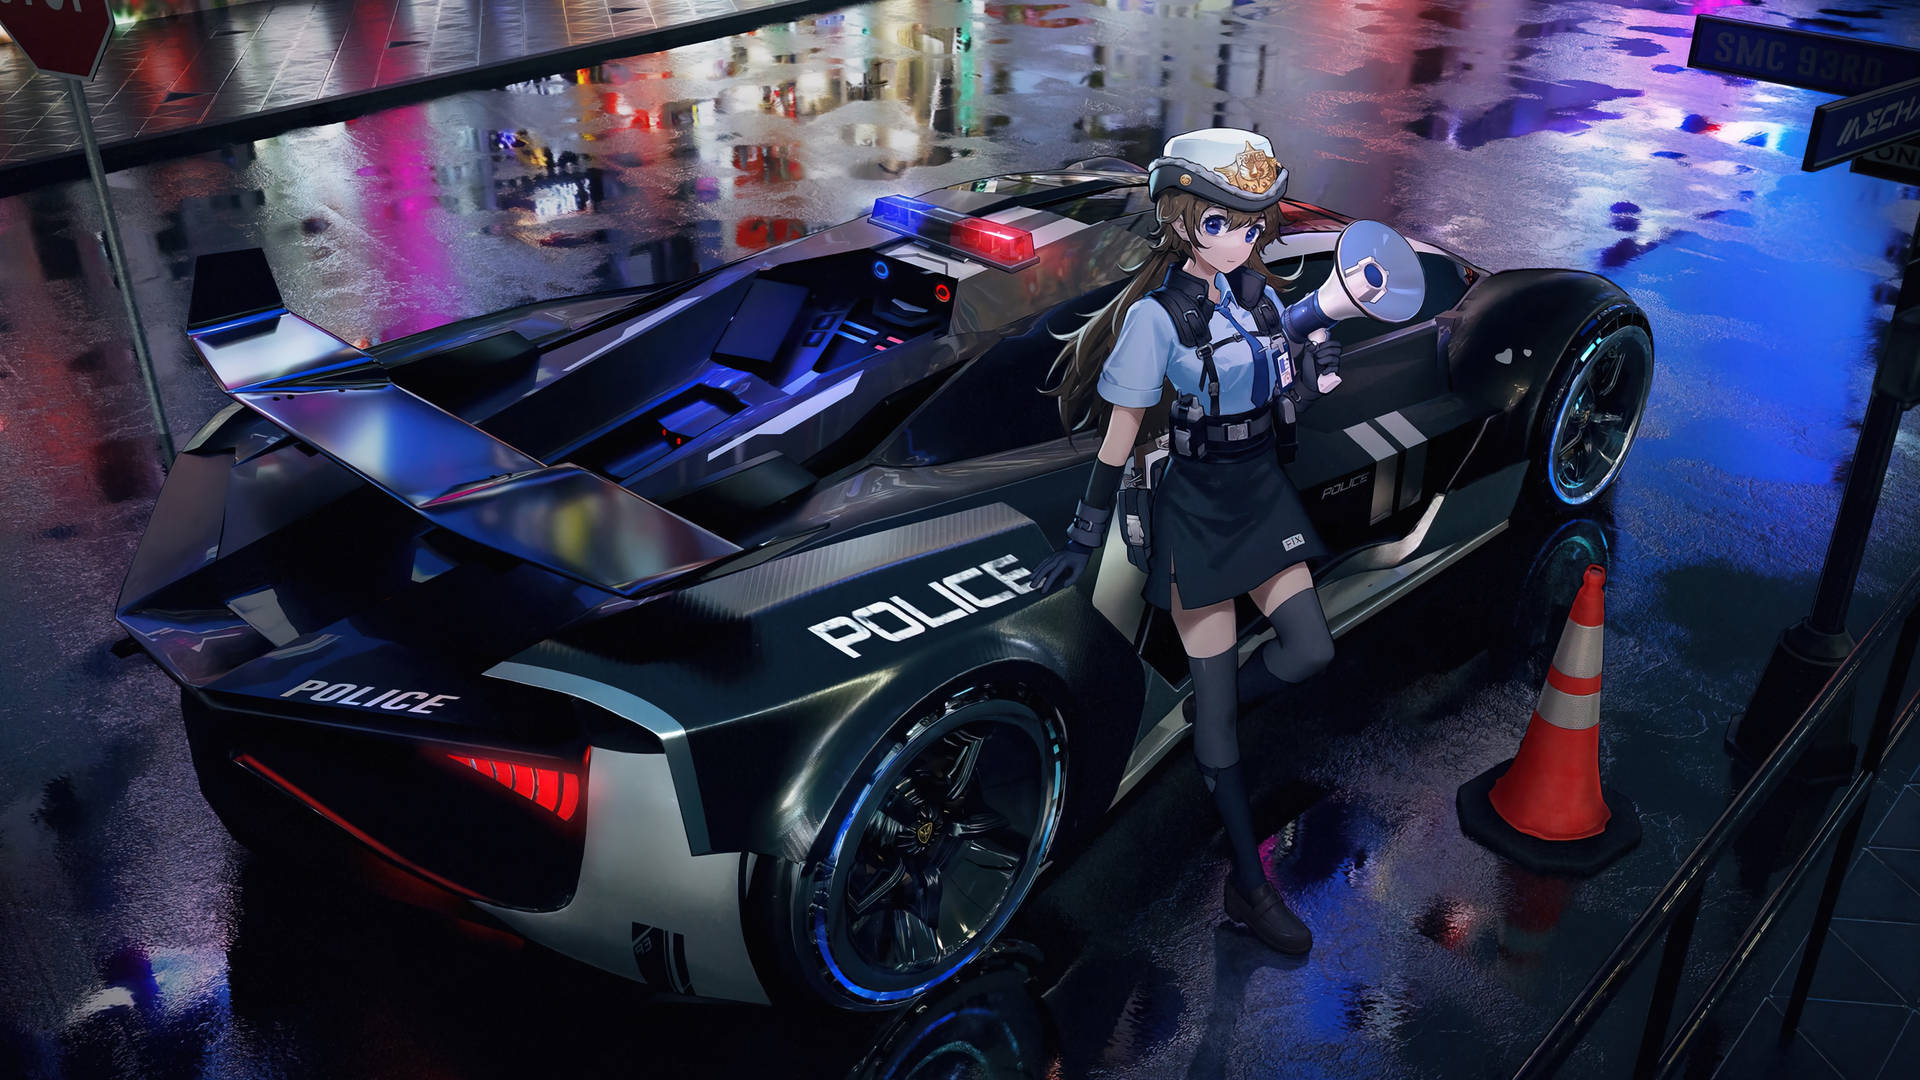 Anime Car 3840X2160 Wallpaper and Background Image